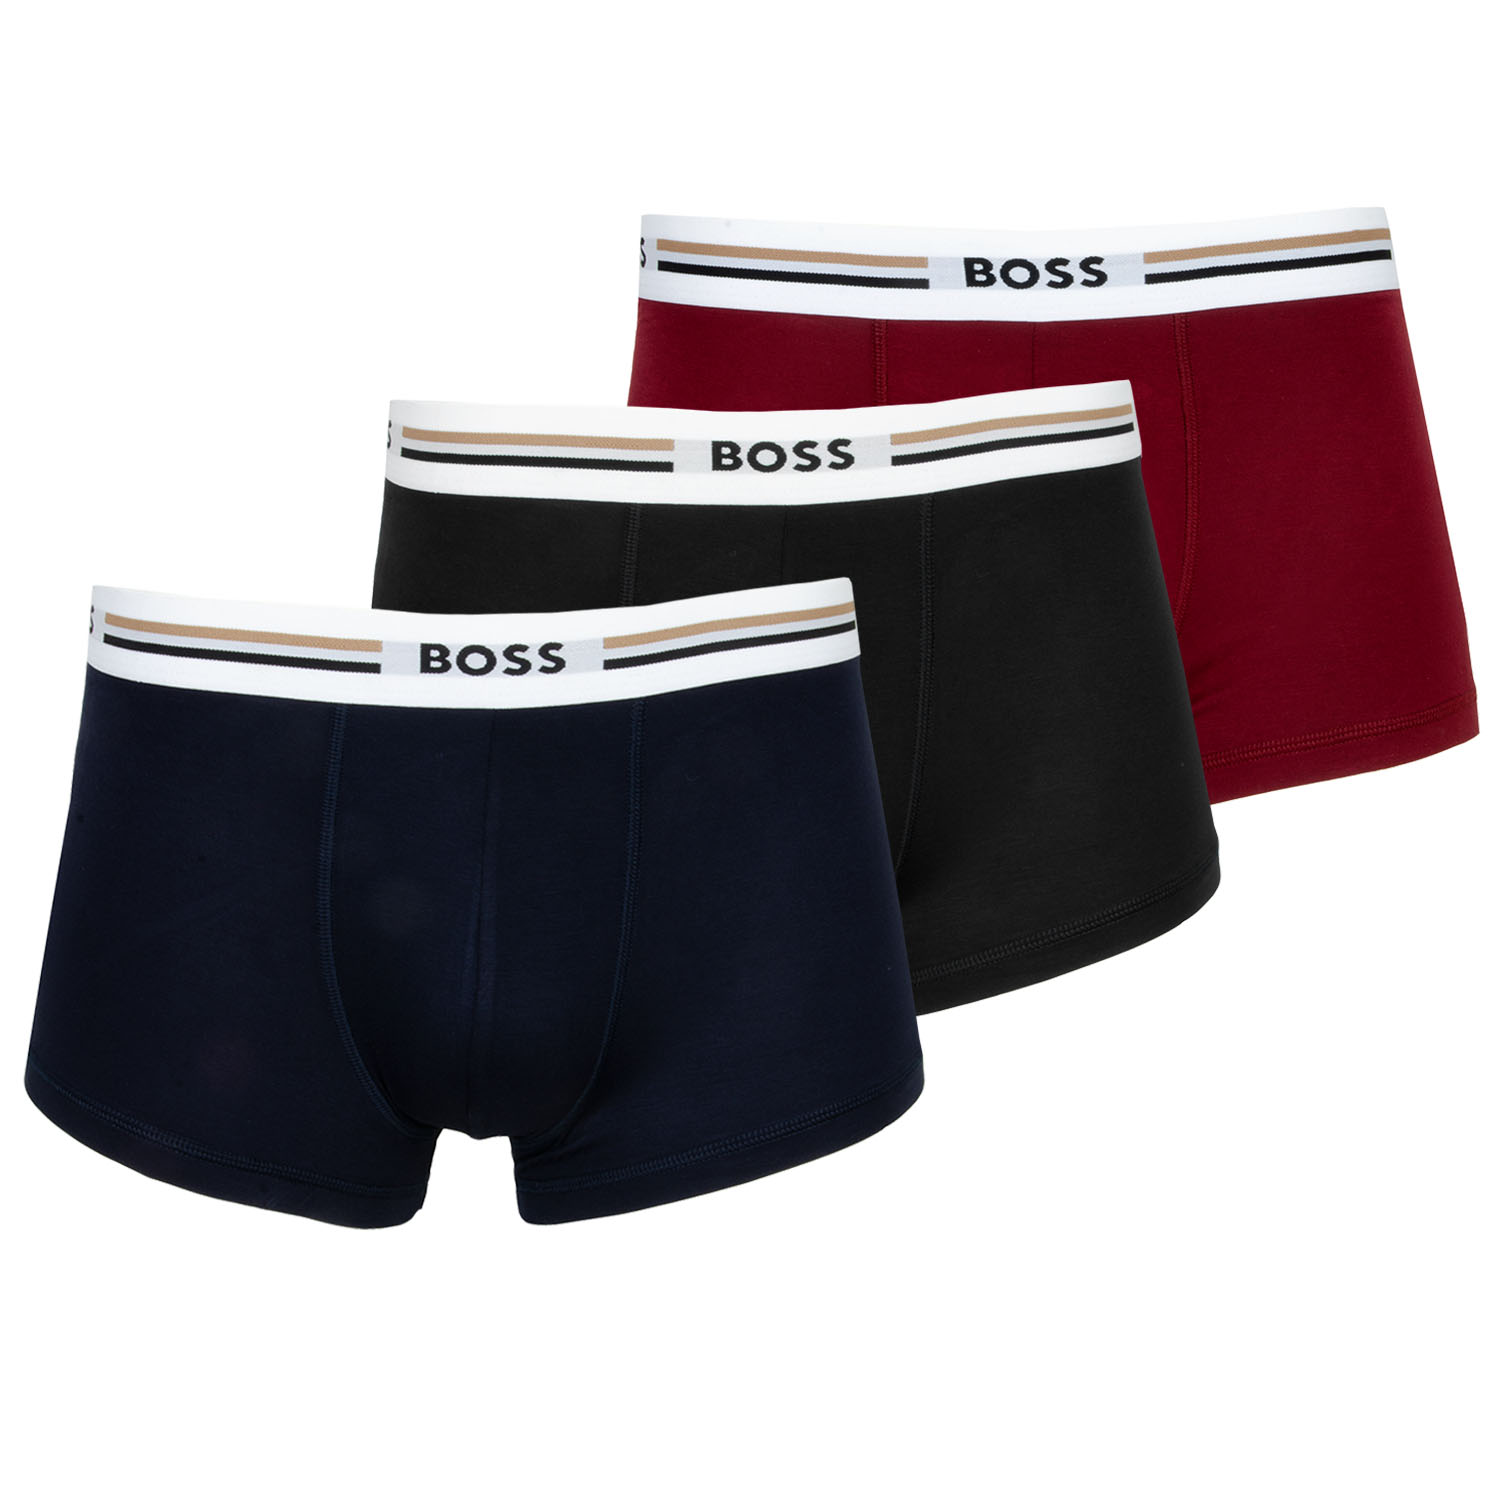 BOSS Stretch Cotton Trunks 3 Pack